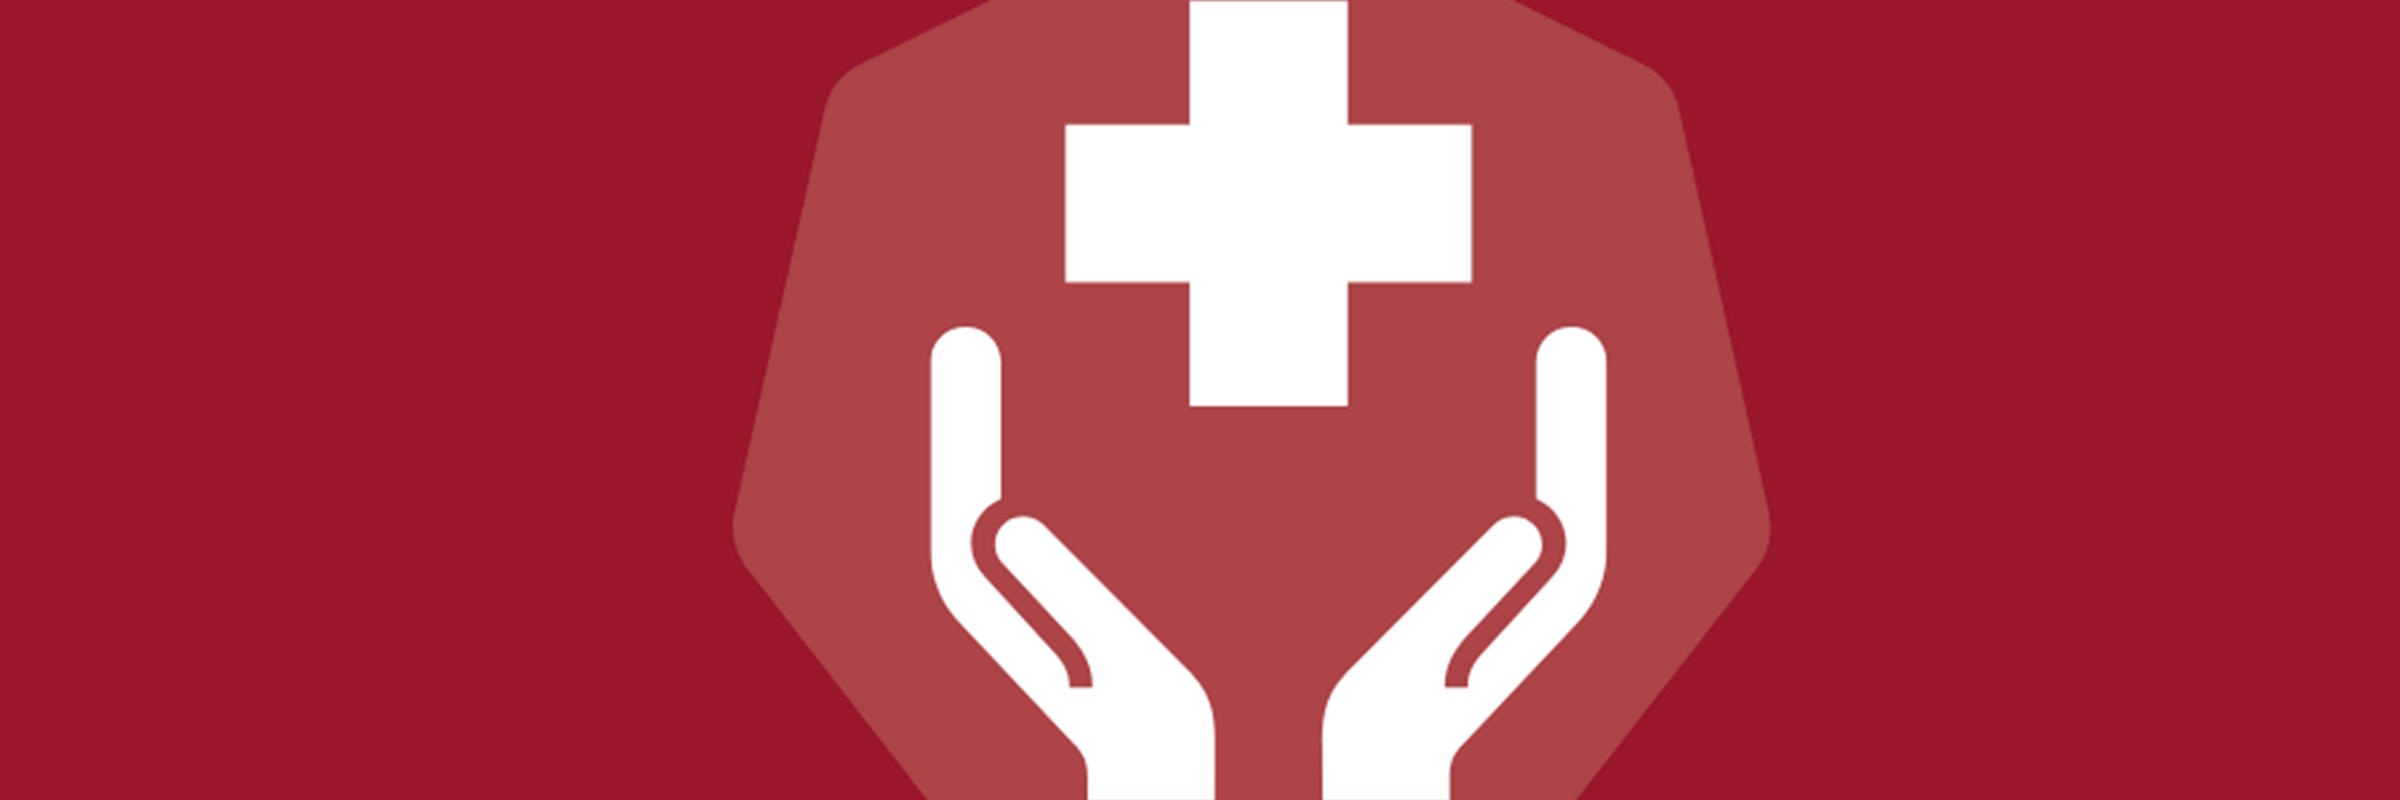 Icon of health plus sign and hands holding it